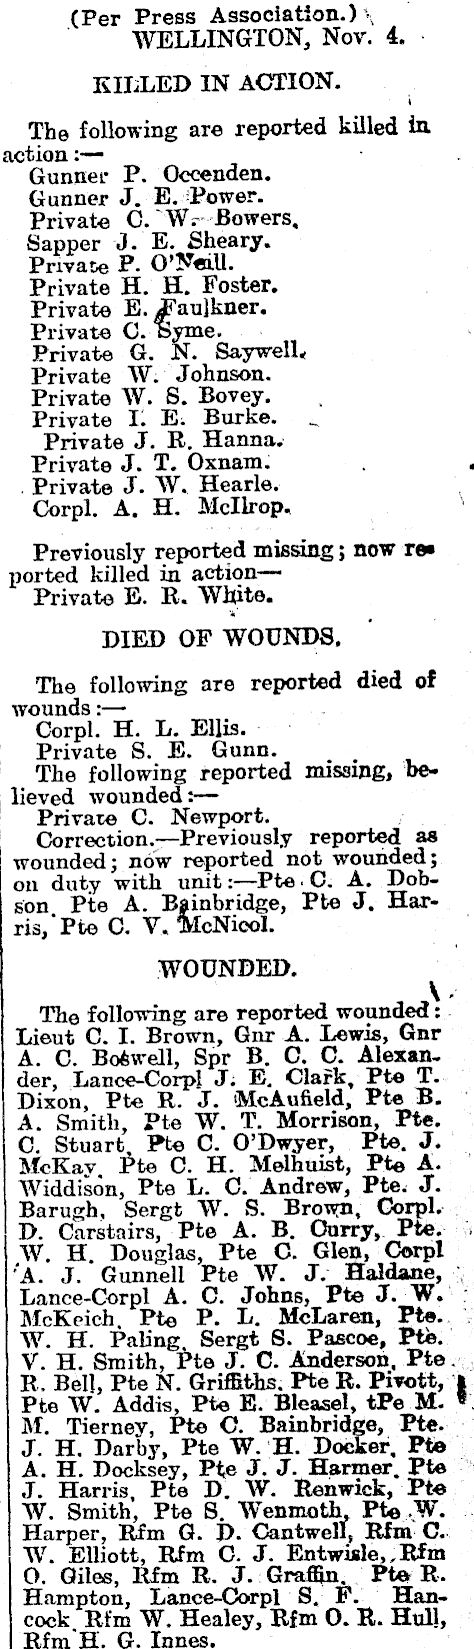 Papers Past Newspapers Wanganui Chronicle 5 November 1917 N Z Casualties